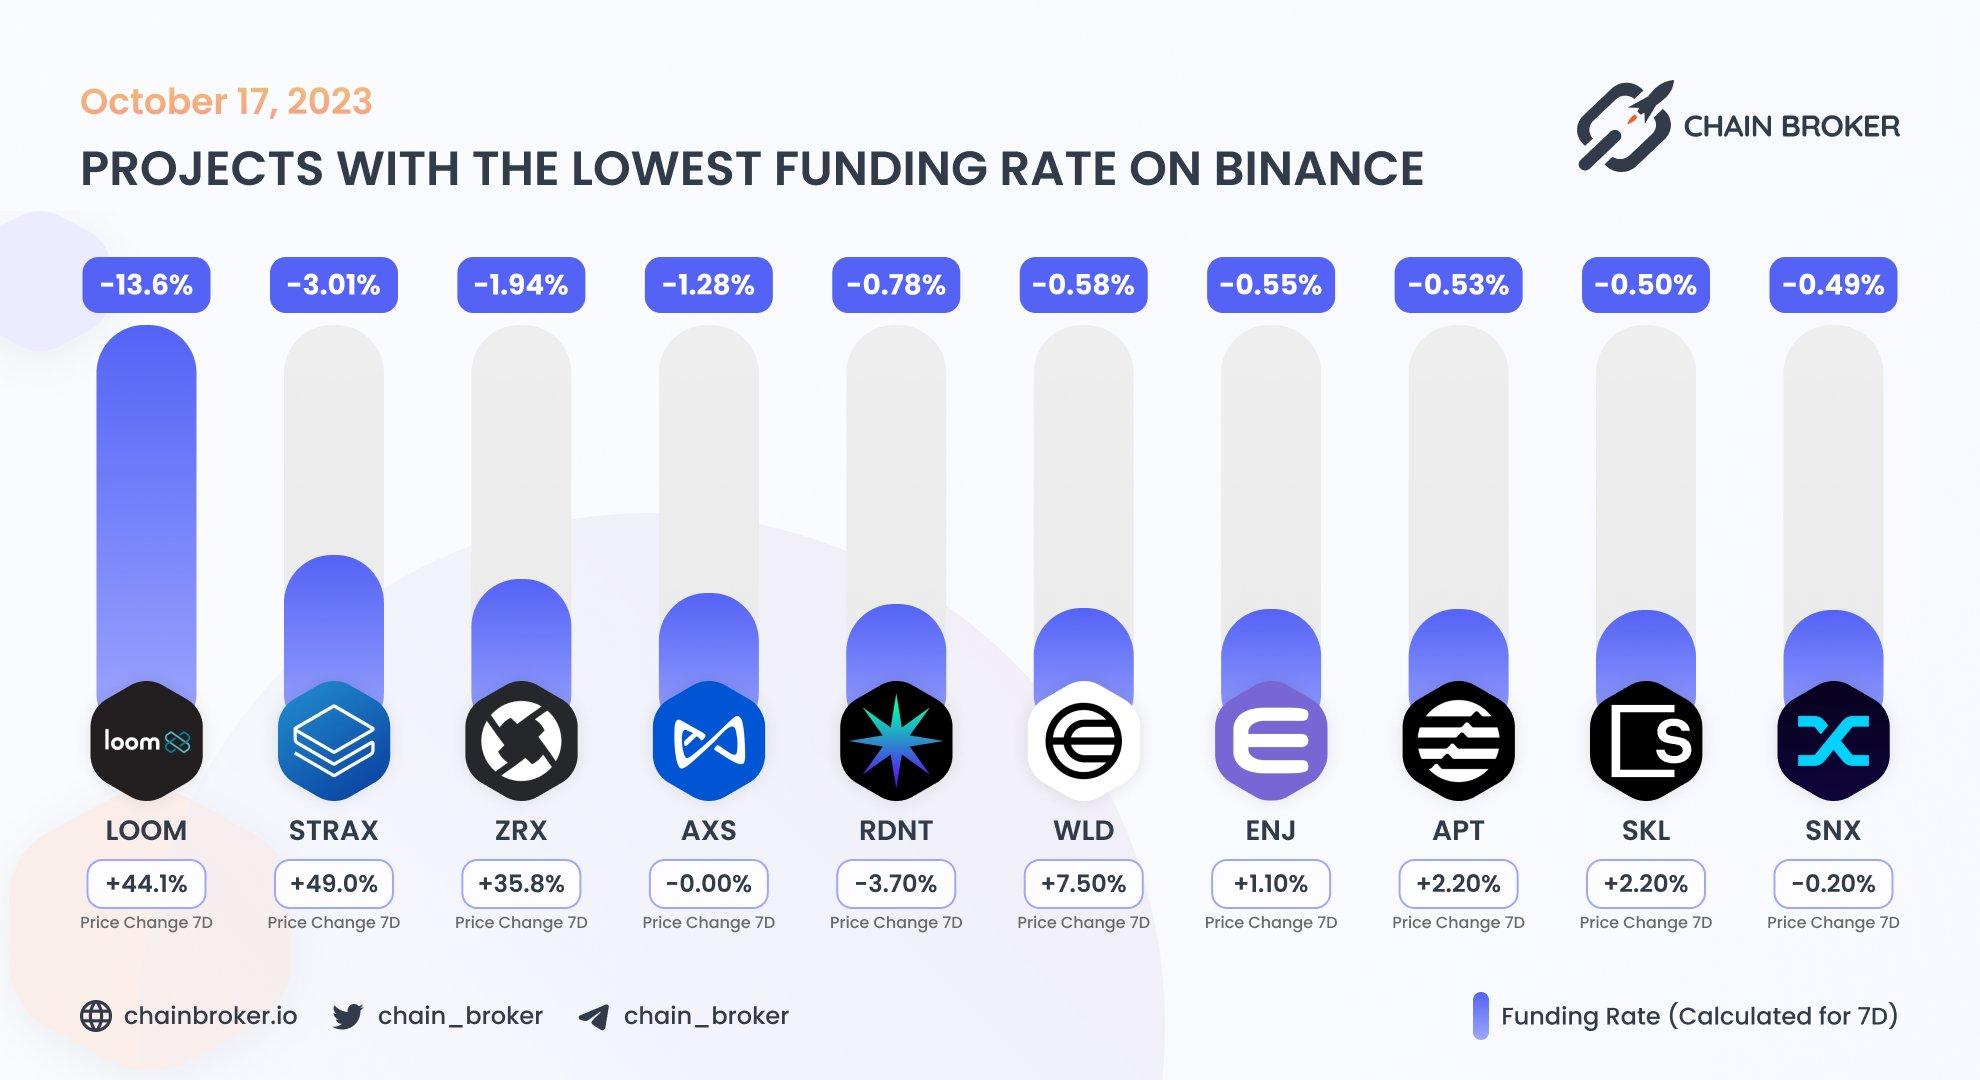 Top projects with lowest funding rate on Binance